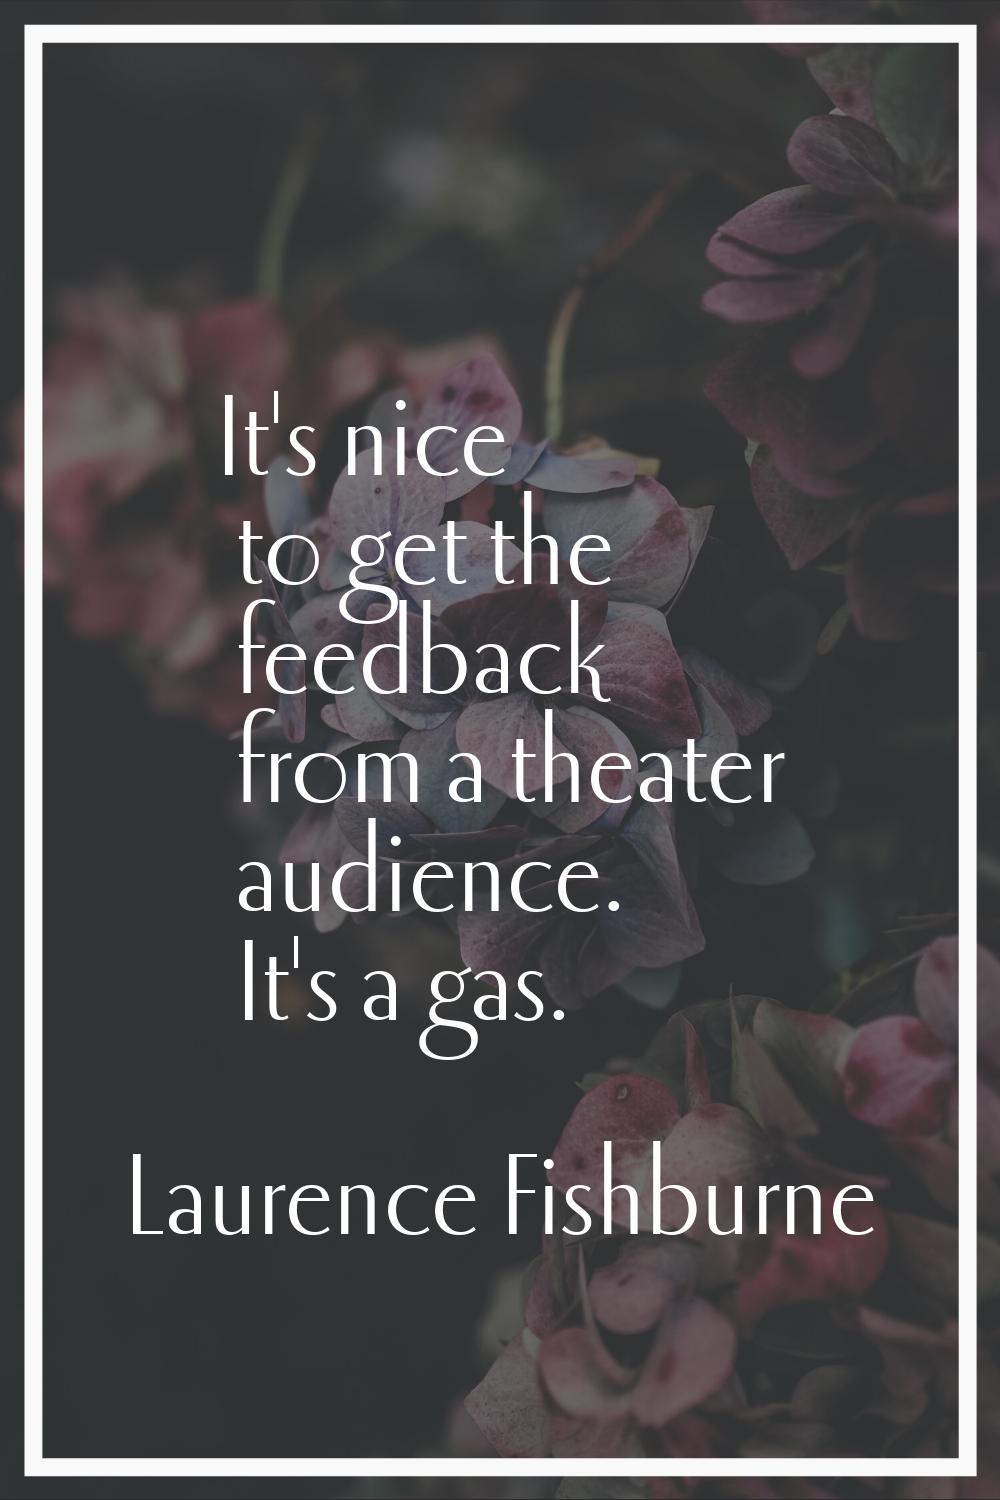 It's nice to get the feedback from a theater audience. It's a gas.